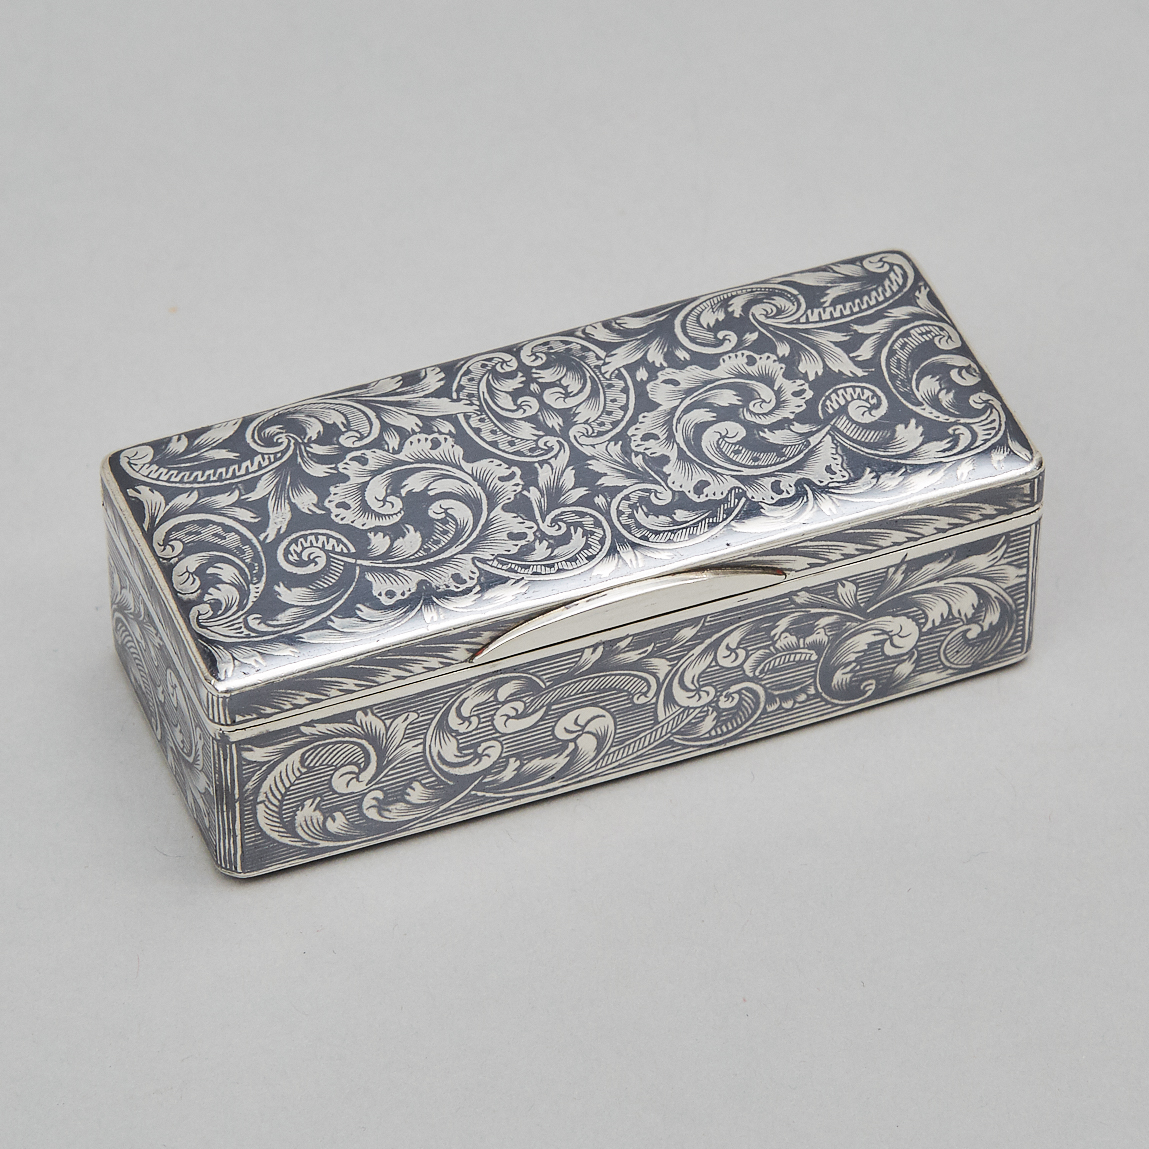 Russian Engraved and Nielloed Silver Rectangular Snuff Box, Moscow, 1846